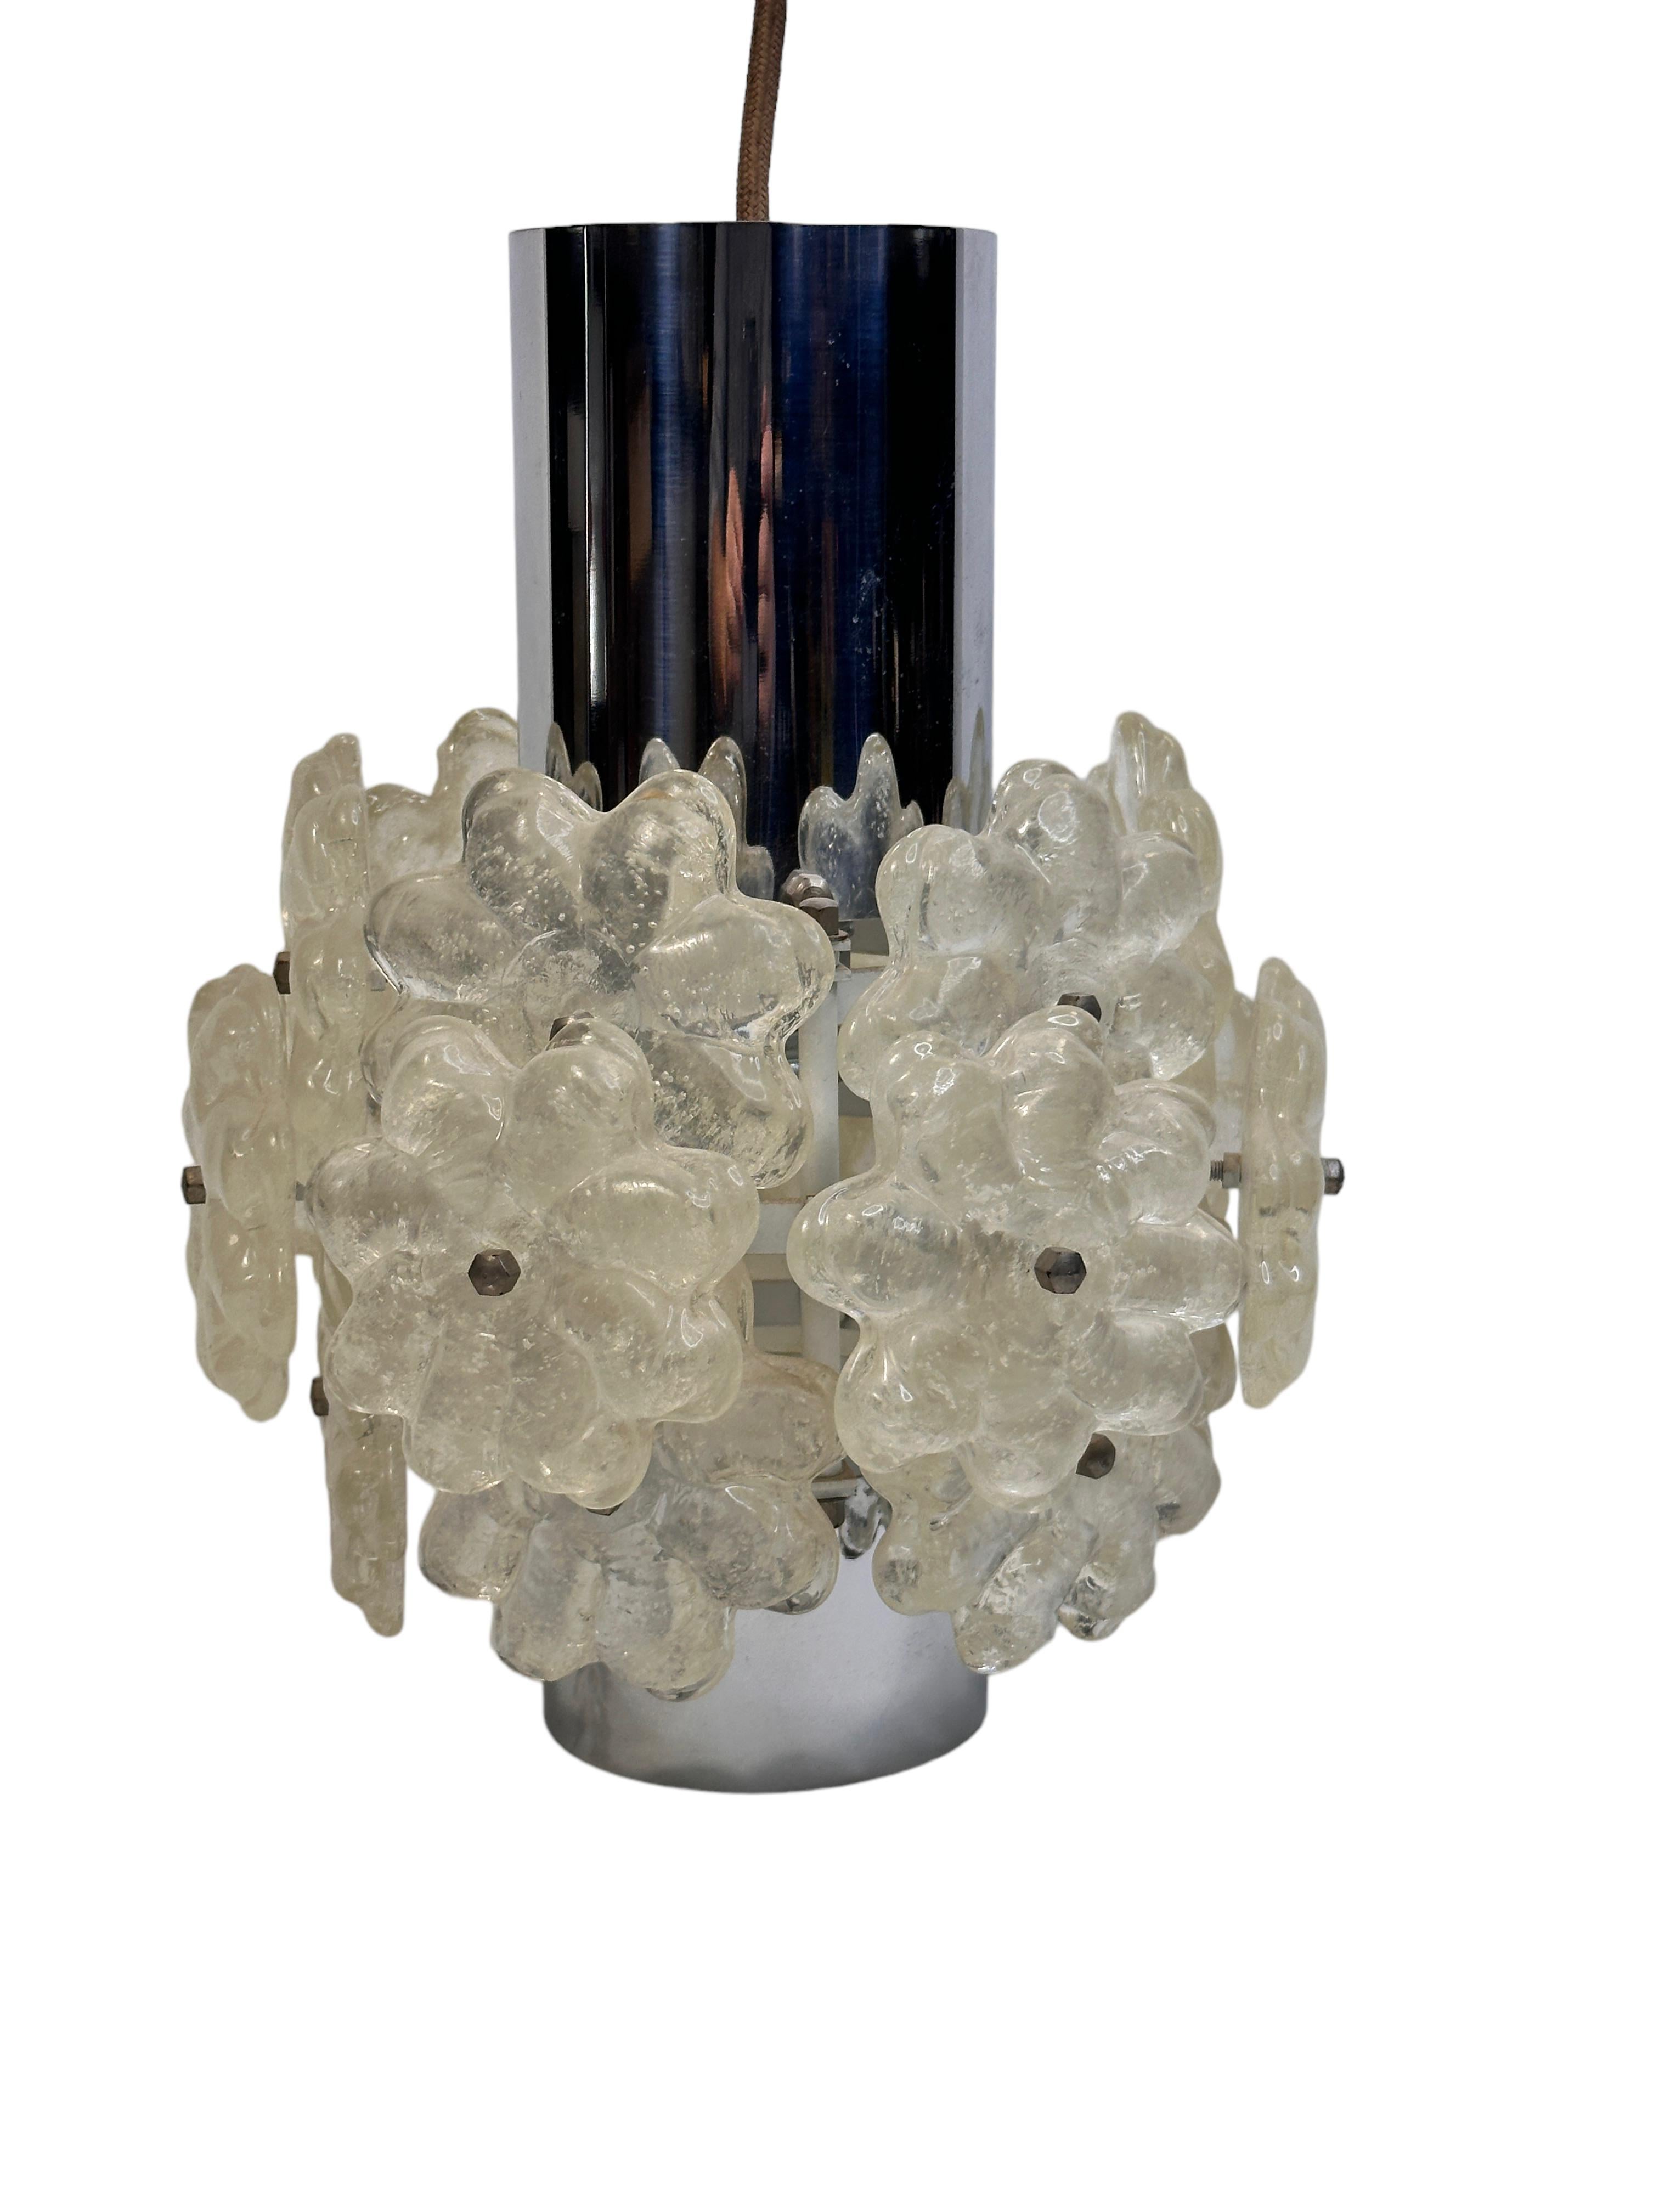 Mid-Century Modern 1 of 6 Chrome Pendant Fixture with Lucite Flower Clusters by Kalmar Austria 1960 For Sale